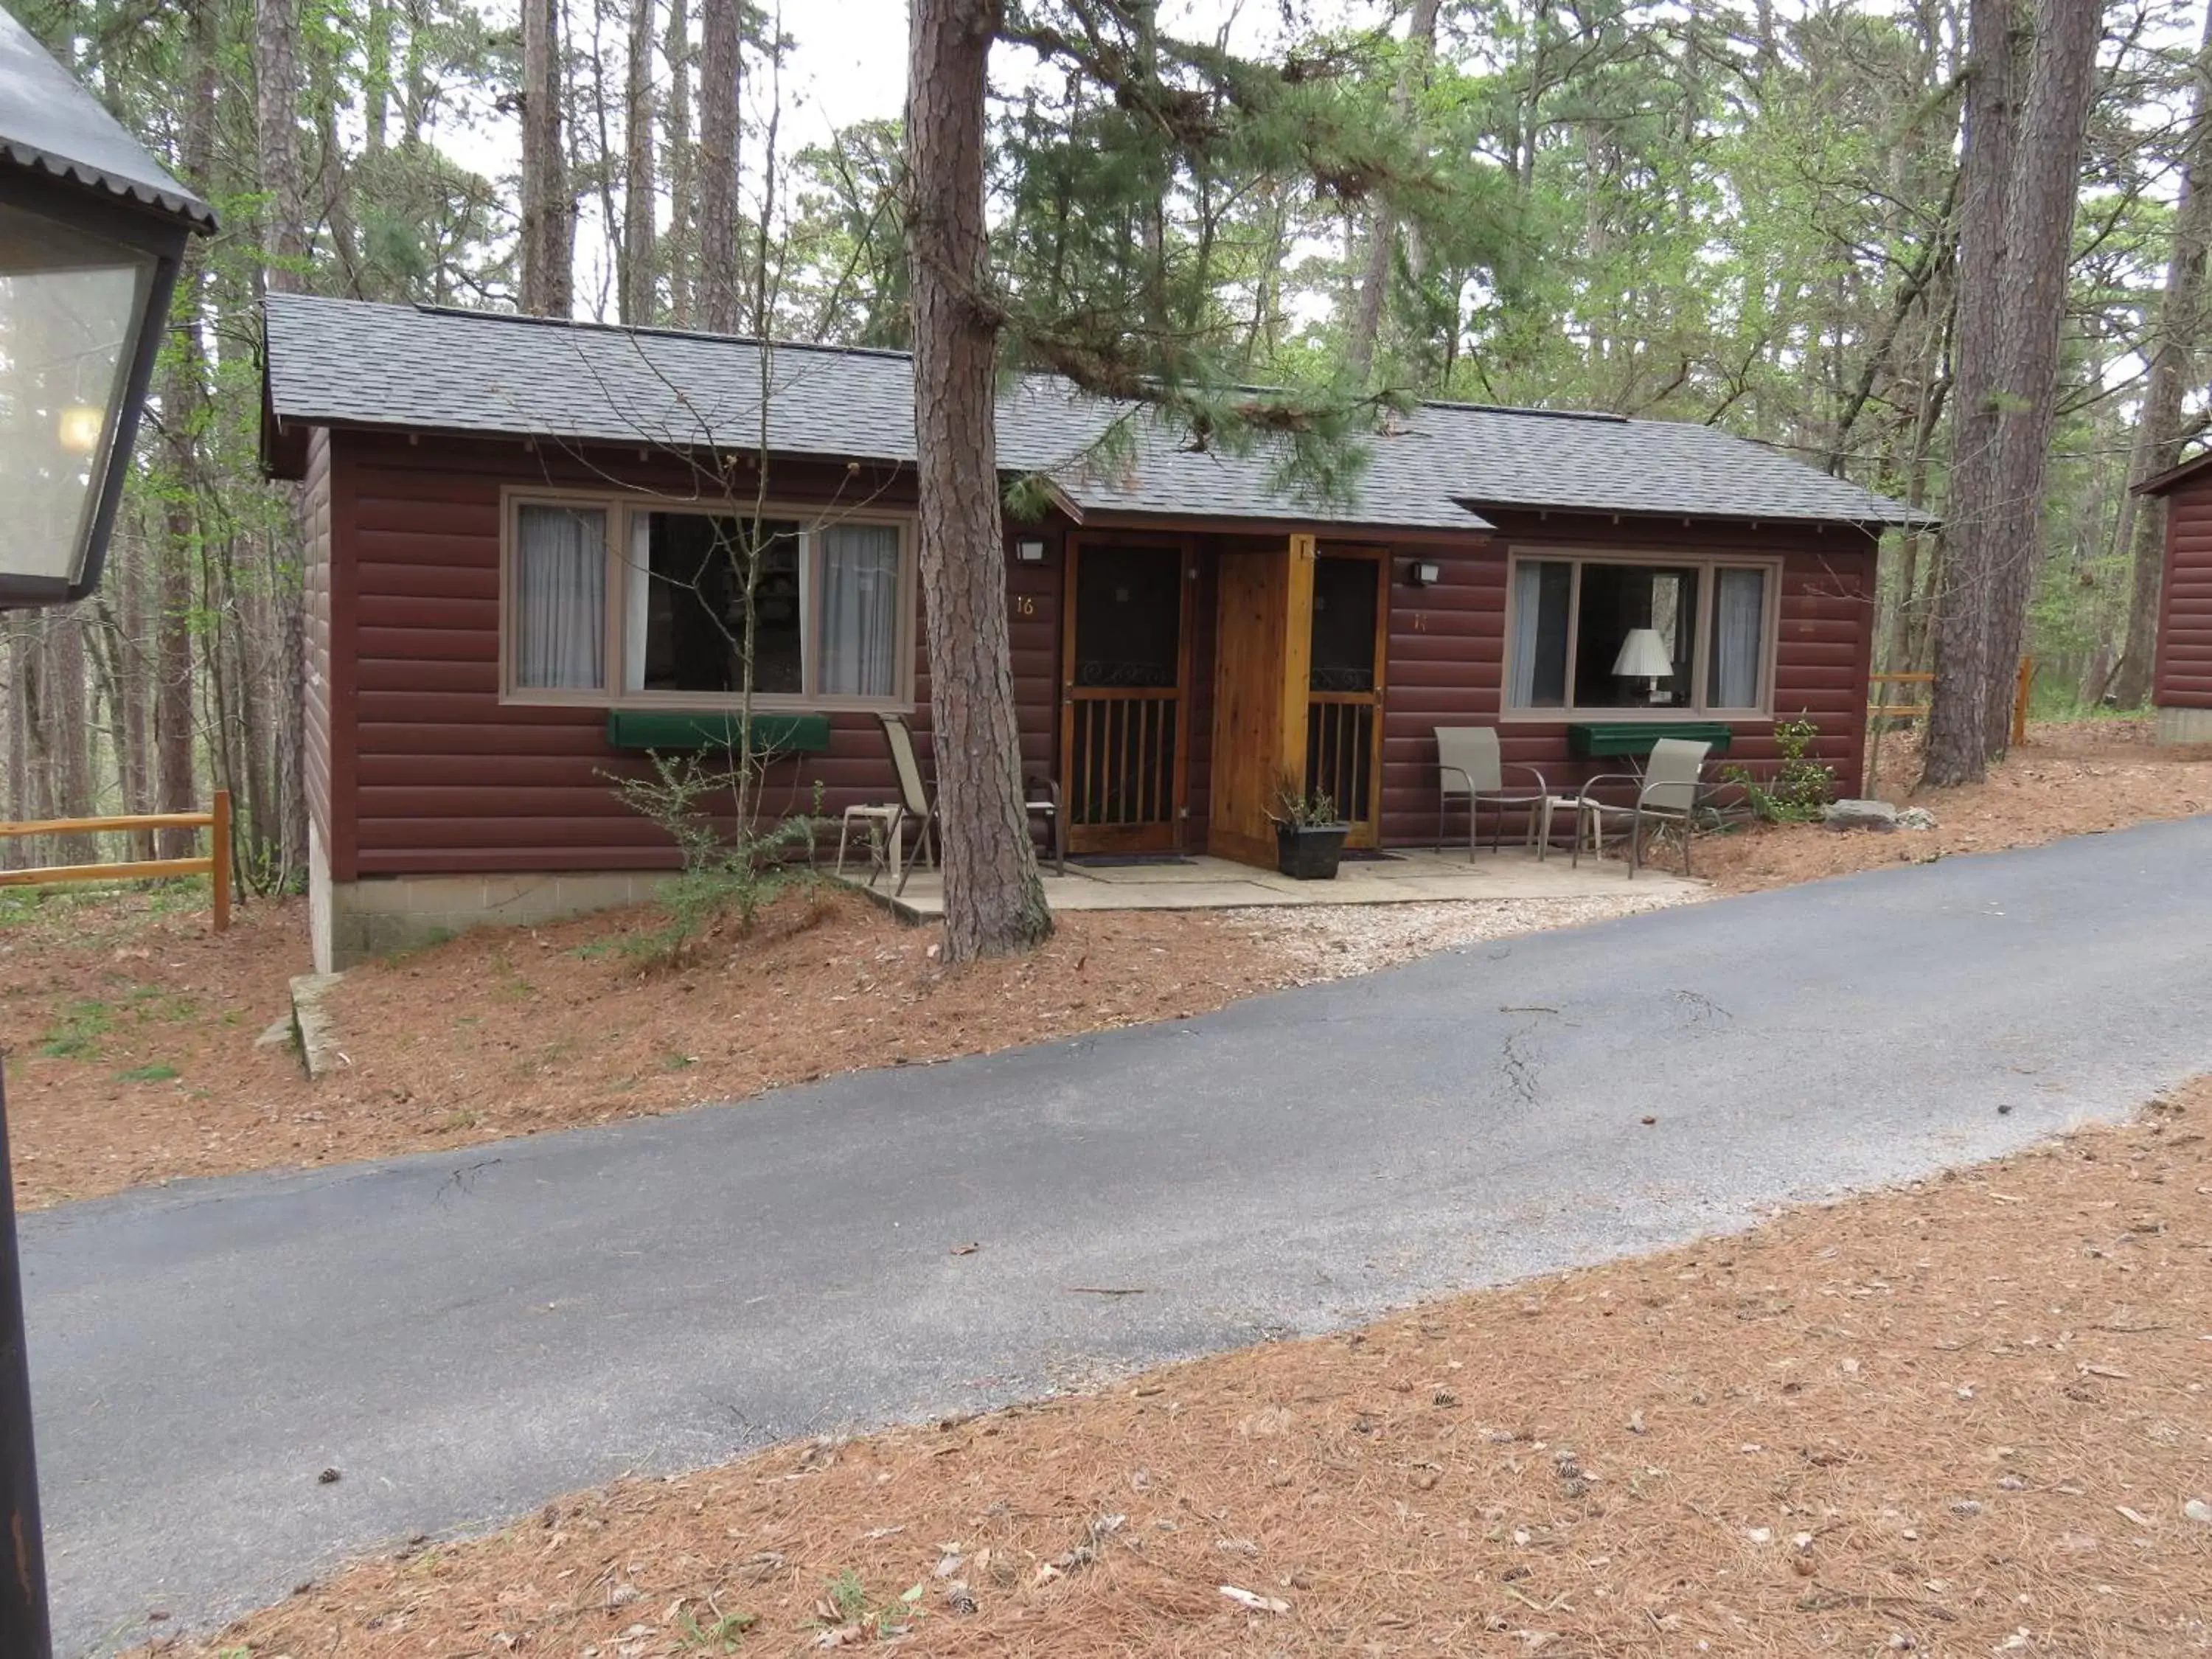 Property Building in Tall Pines Inn